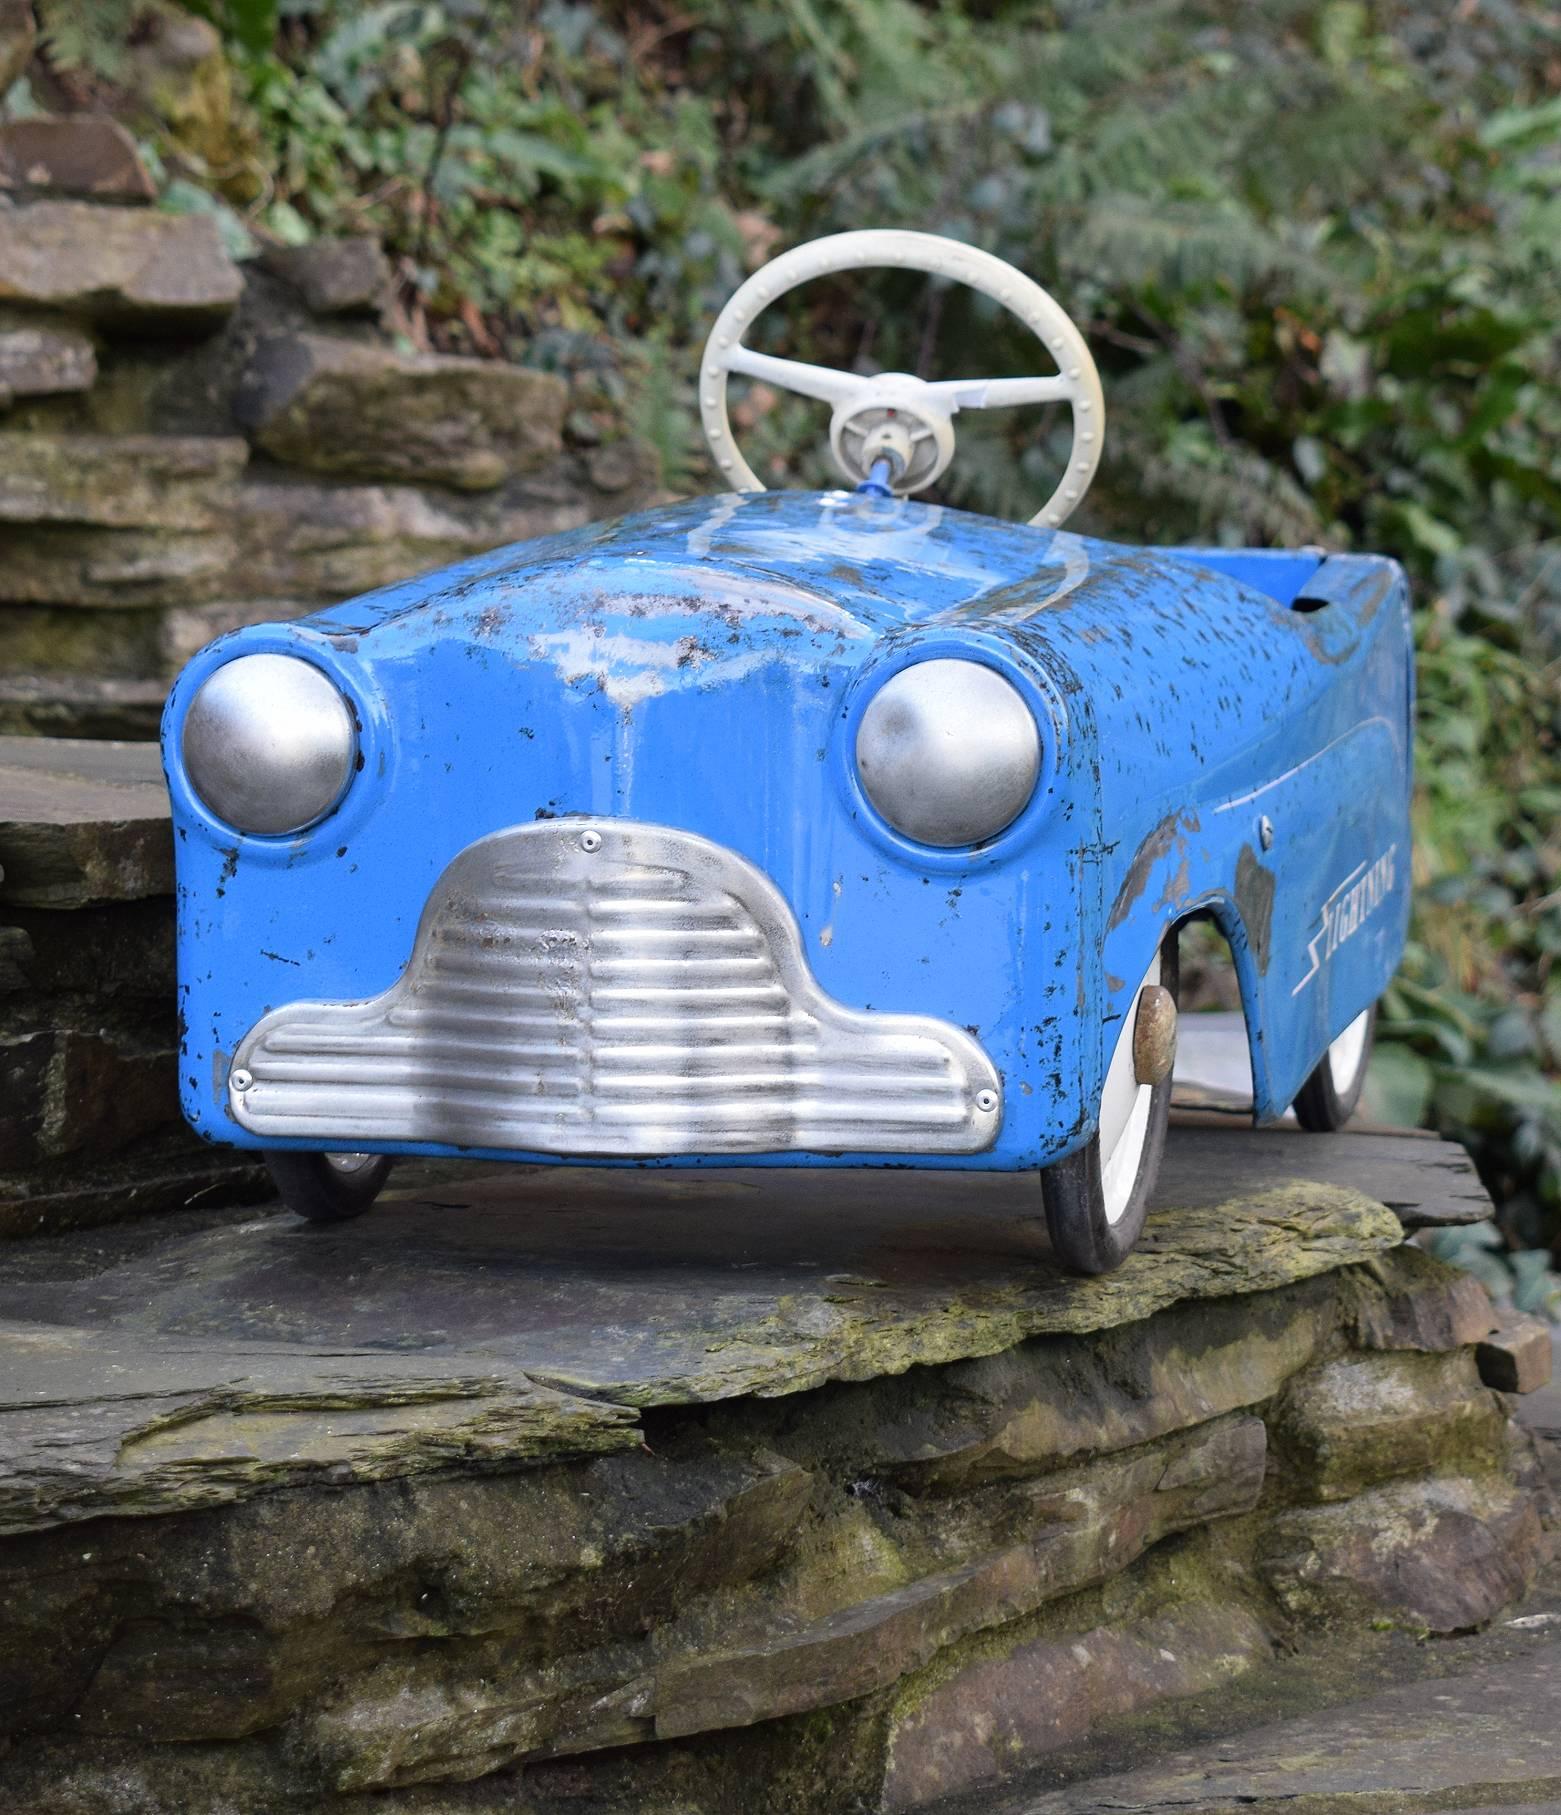 This is a great opportunity to acquire a totally authentic Triang lightening child’s pedal car. Produced in the 1950s and with a modified suspension this car has undergone a very recent full nut and bolt restoration to enhance the original color and